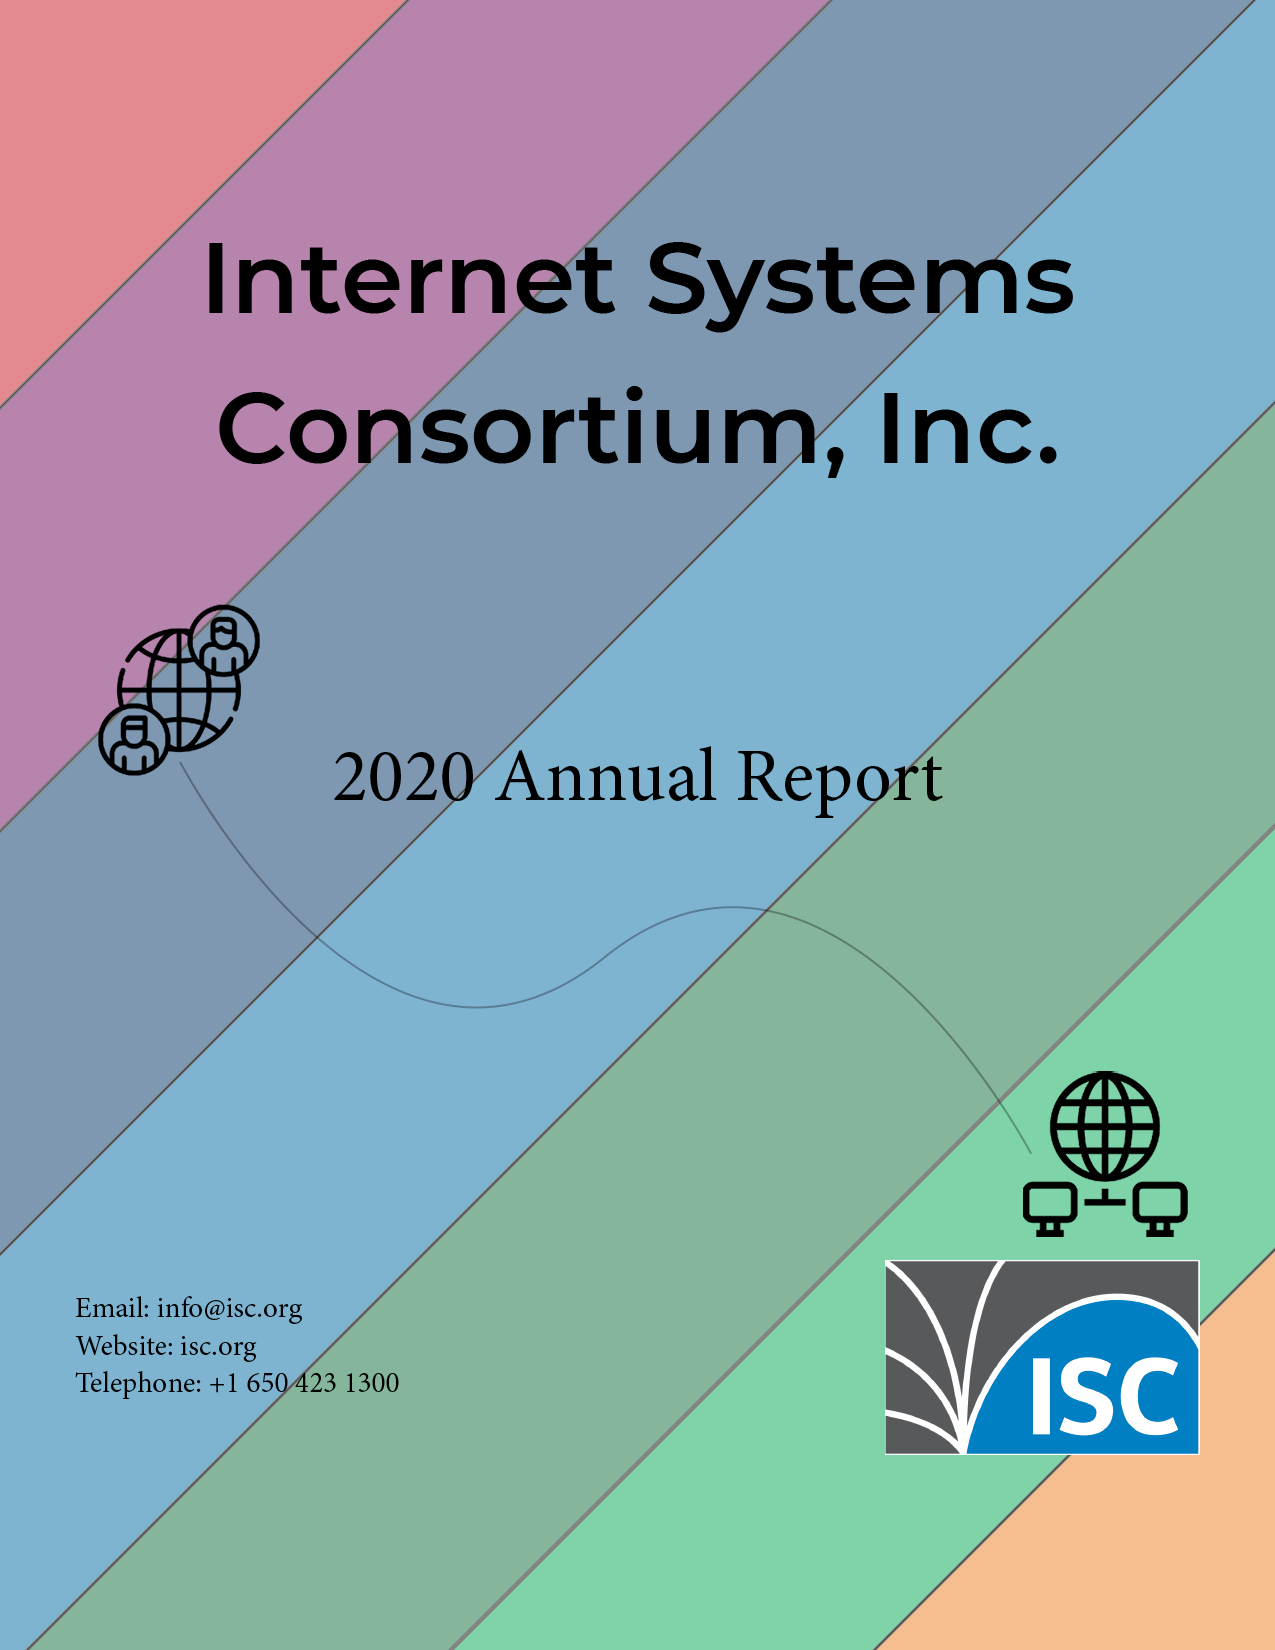 ISC's 2020 annual report